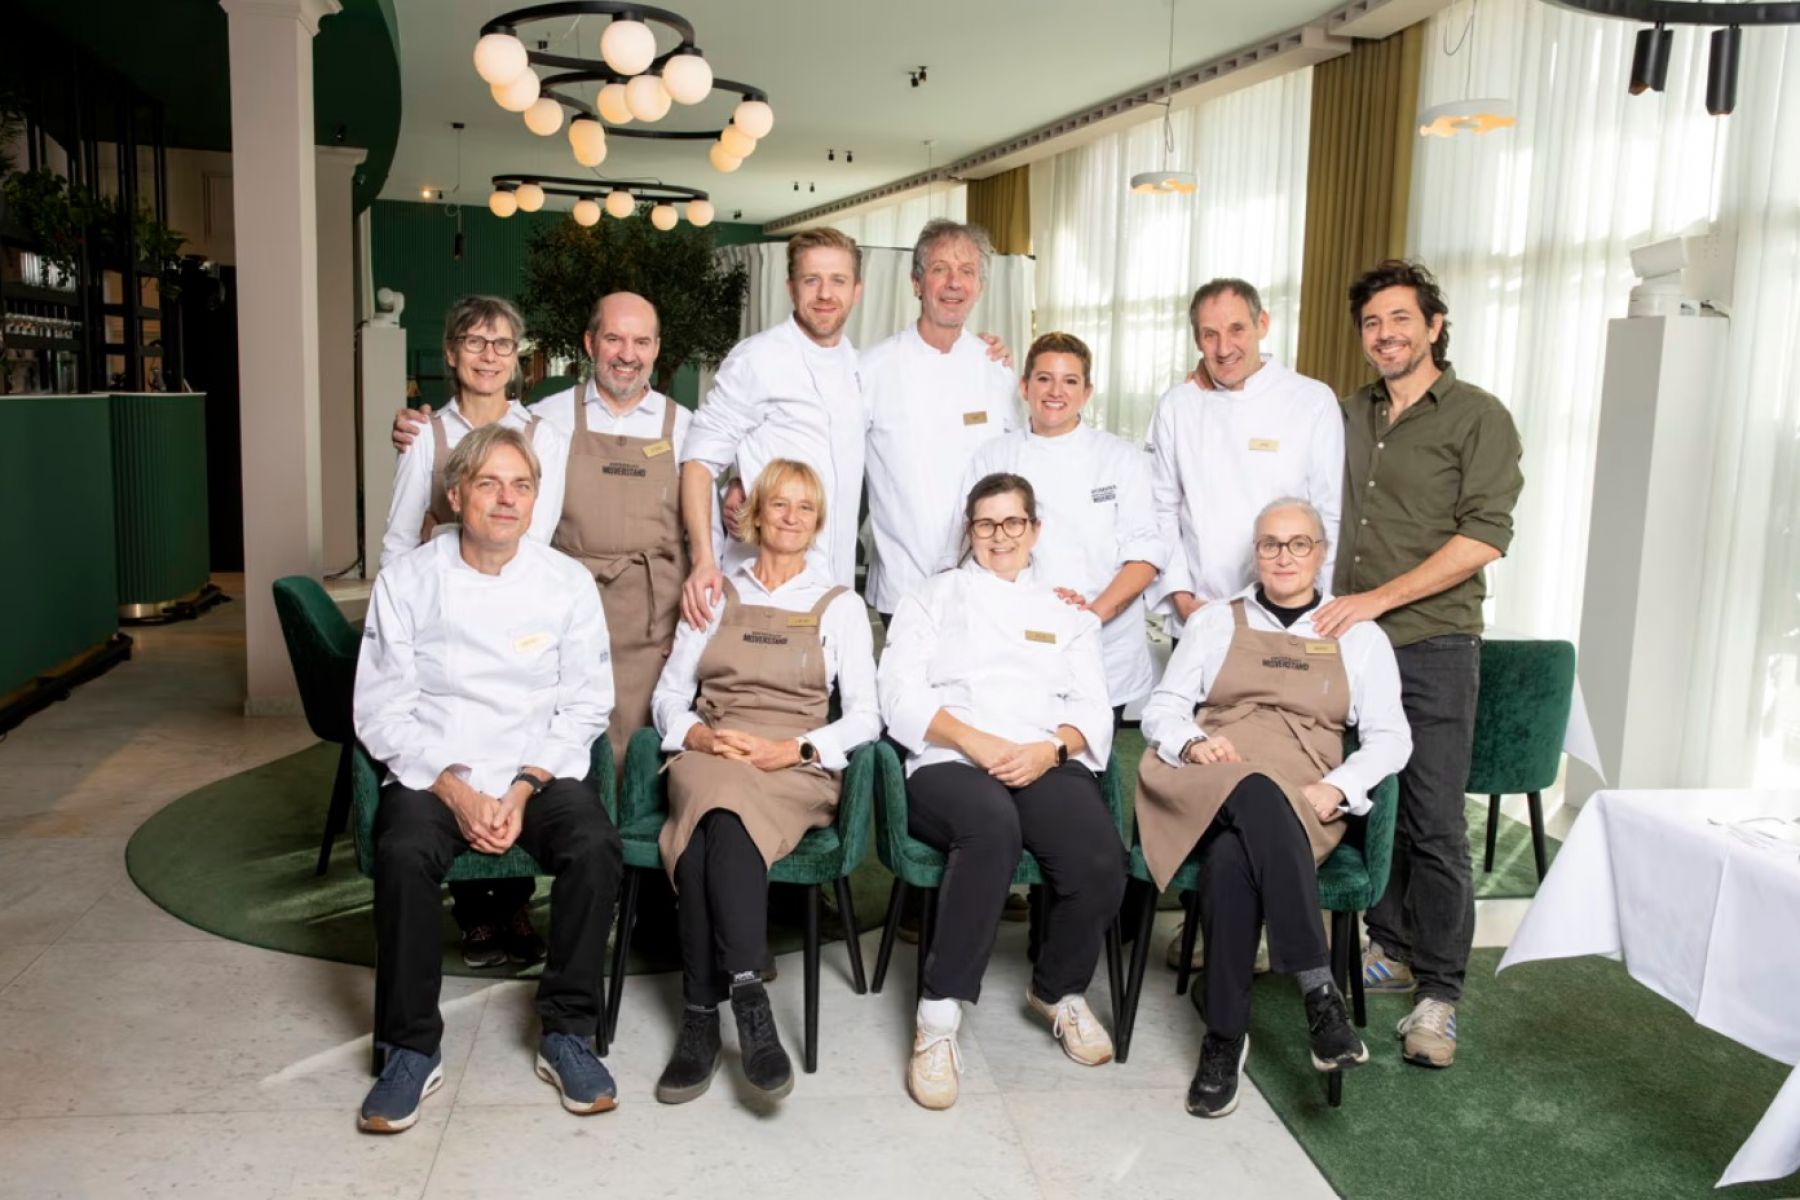 Restaurant Misverstand Season 3: Meet the Employees Living and Working Together in Ostend